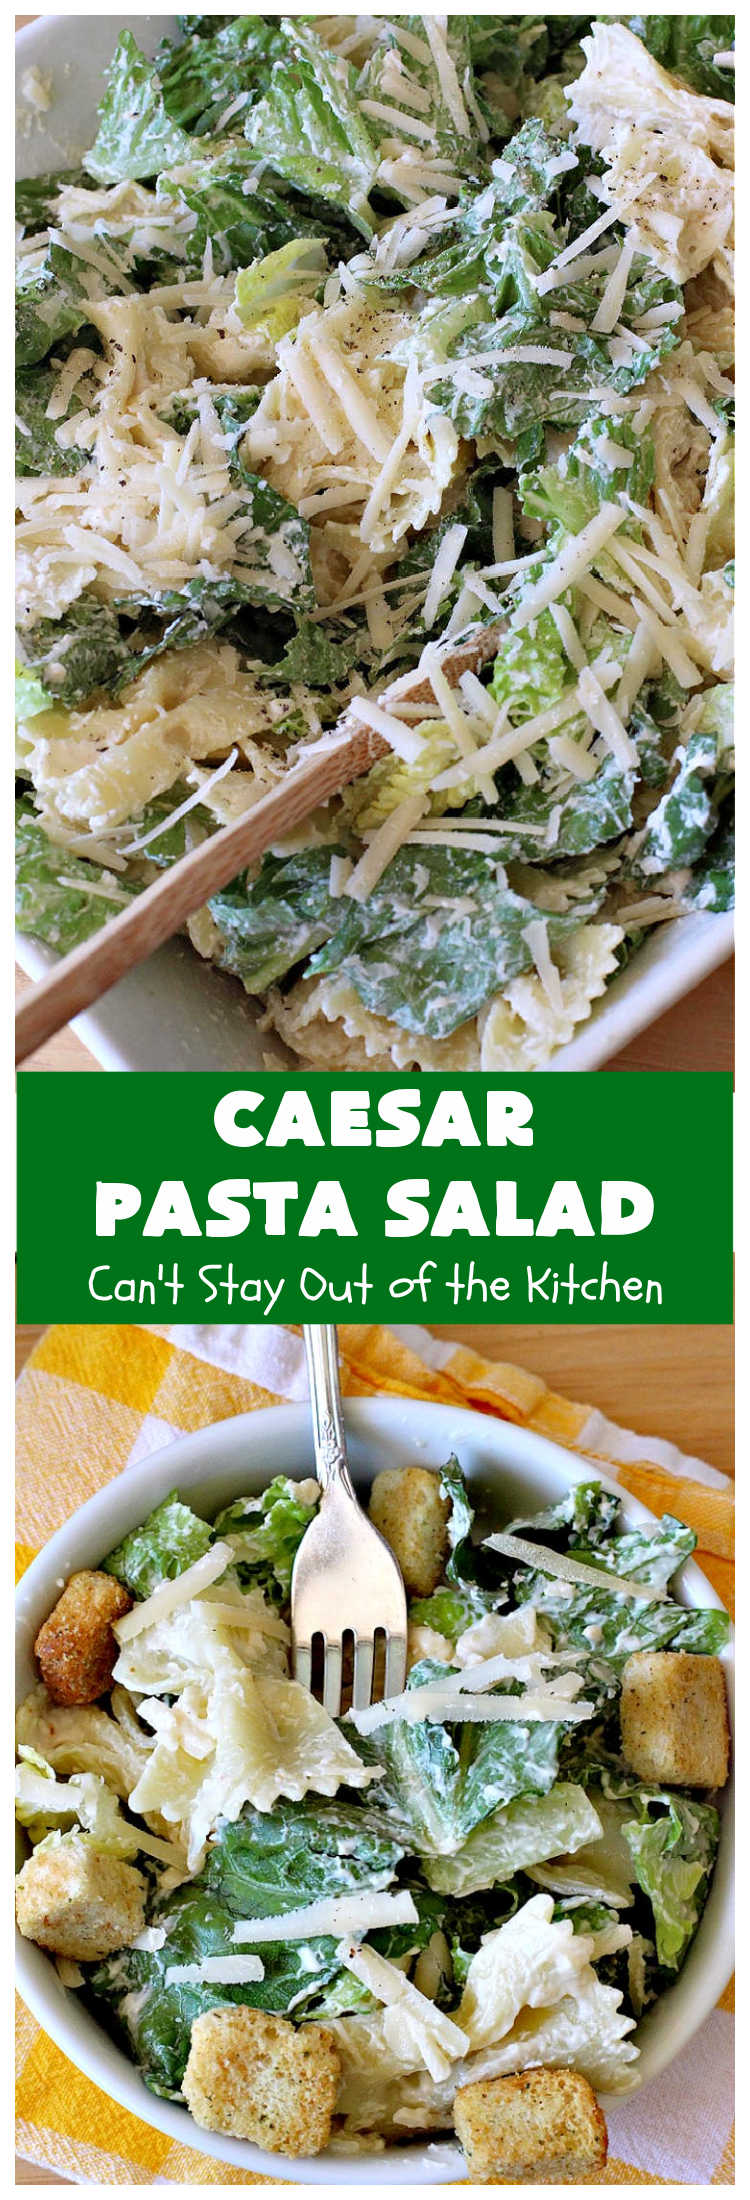 Caesar Pasta Salad | Can't Stay Out of the Kitchen | this is a terrific variation on traditional #CaesarSalad #recipes that includes bow-tie #pasta & a quick & easy homemade #SaladDressing. Great for potlucks & backyard BBQs. #salad #PastaSalad #ParmesanCheese #CaesarPastaSaladCaesar Pasta Salad | Can't Stay Out of the Kitchen | this is a terrific variation on traditional #CaesarSalad #recipes that includes bow-tie #pasta & a quick & easy homemade #SaladDressing. Great for potlucks & backyard BBQs. #salad #PastaSalad #ParmesanCheese #CaesarPastaSalad